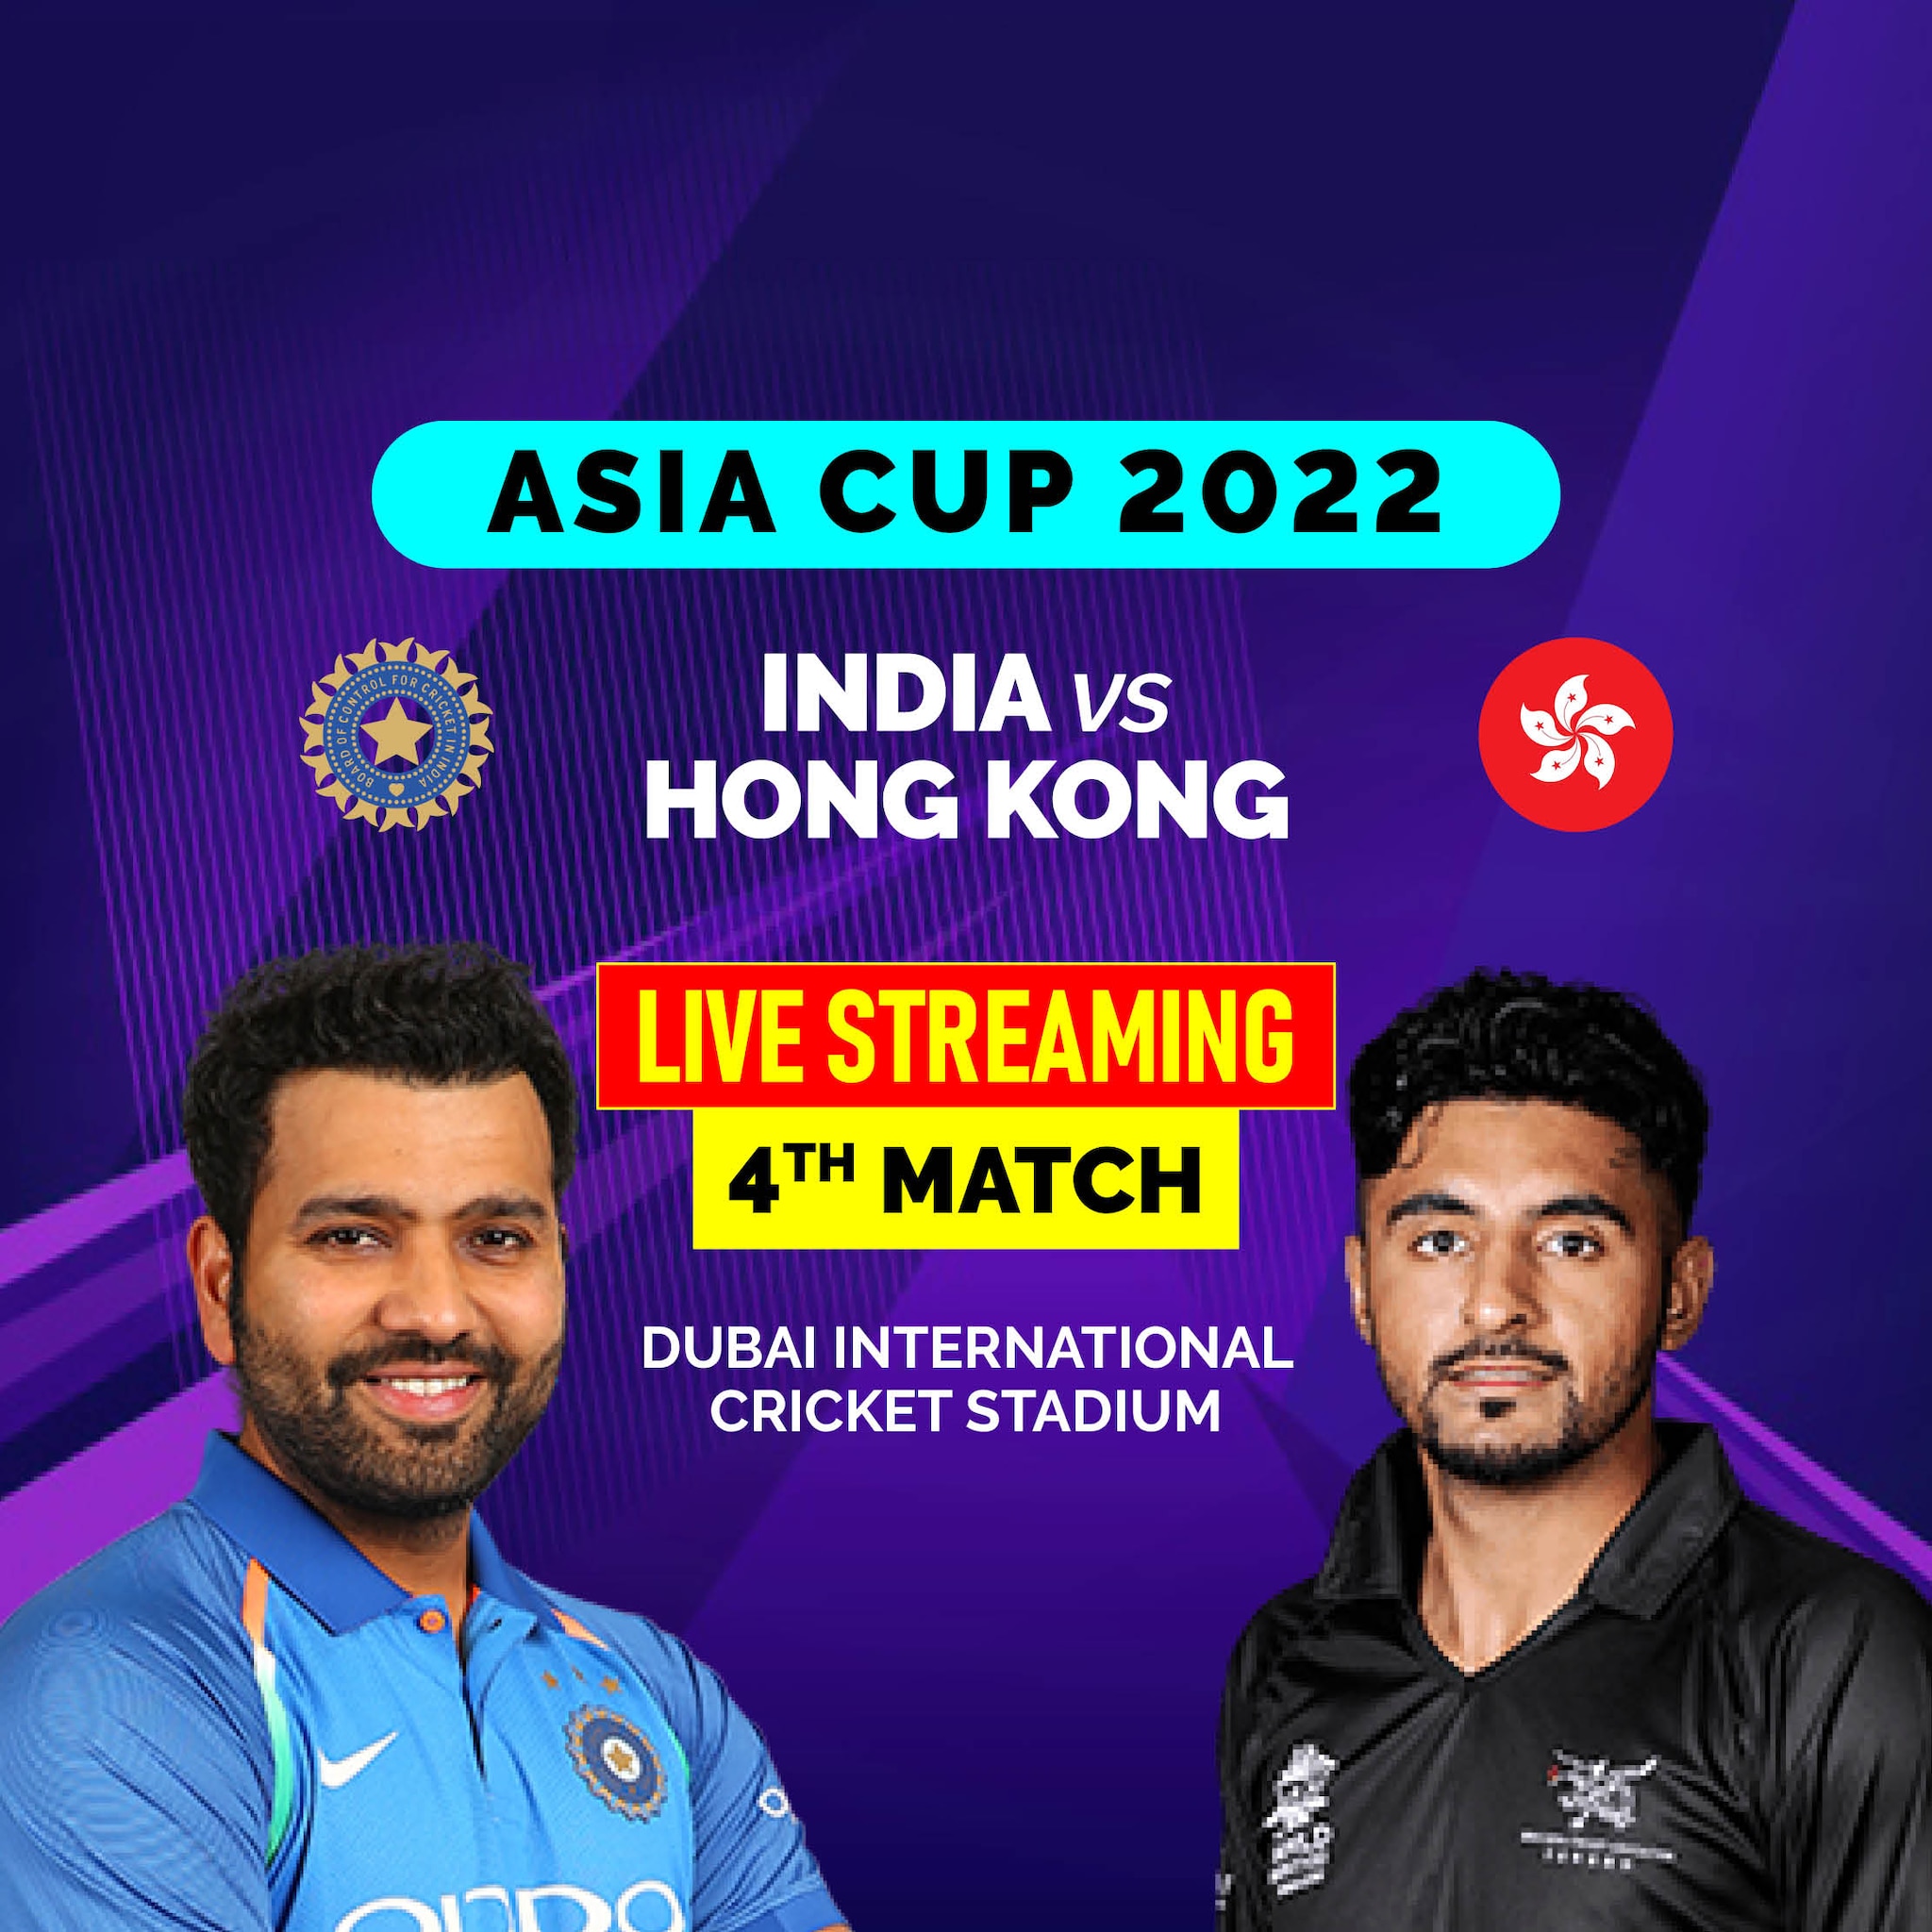 today live match asia cup